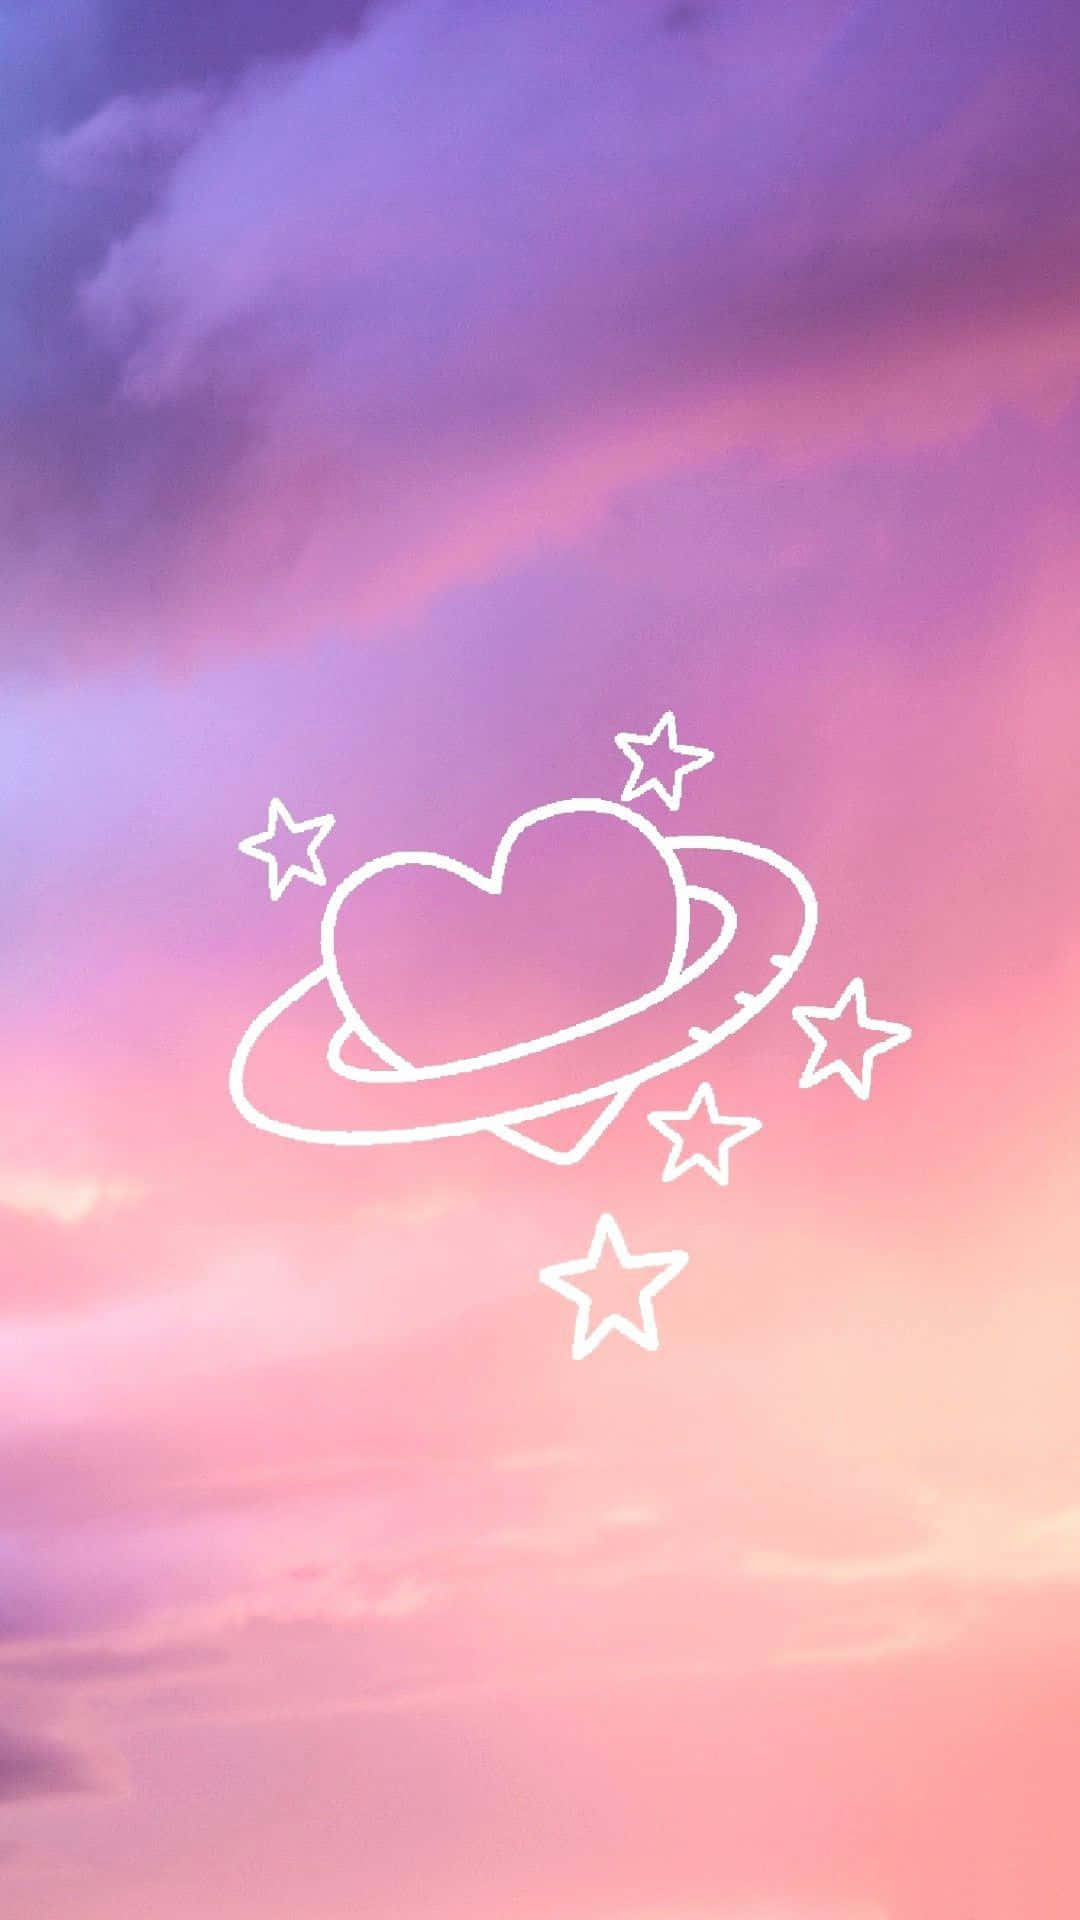 Add Some Pretty Pink To Your Day With This Girly Aesthetic Wallpaper